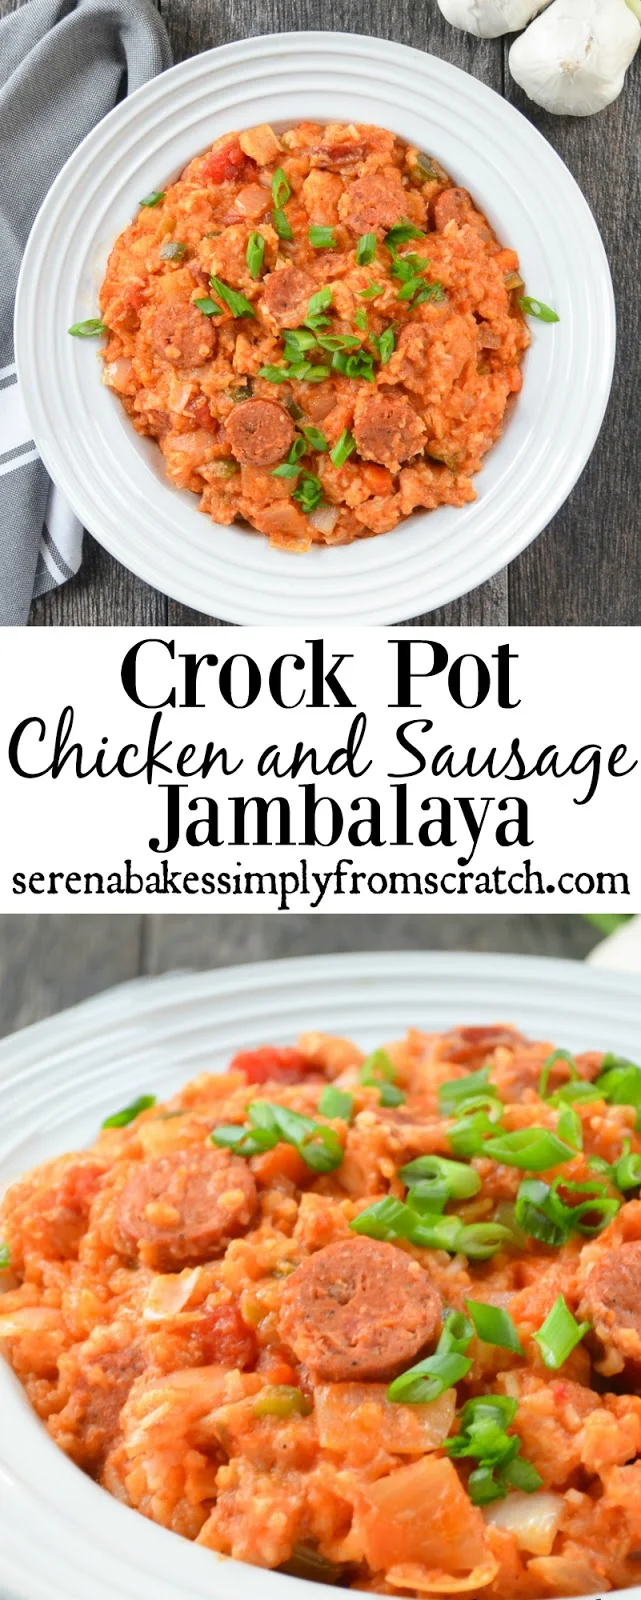 Crock Pot Chicken and Sausage Jambalaya's the perfect way to celebrate so Fat Tuesday or just an easy dinner for any night! serenabakessimplyfromscratch.com